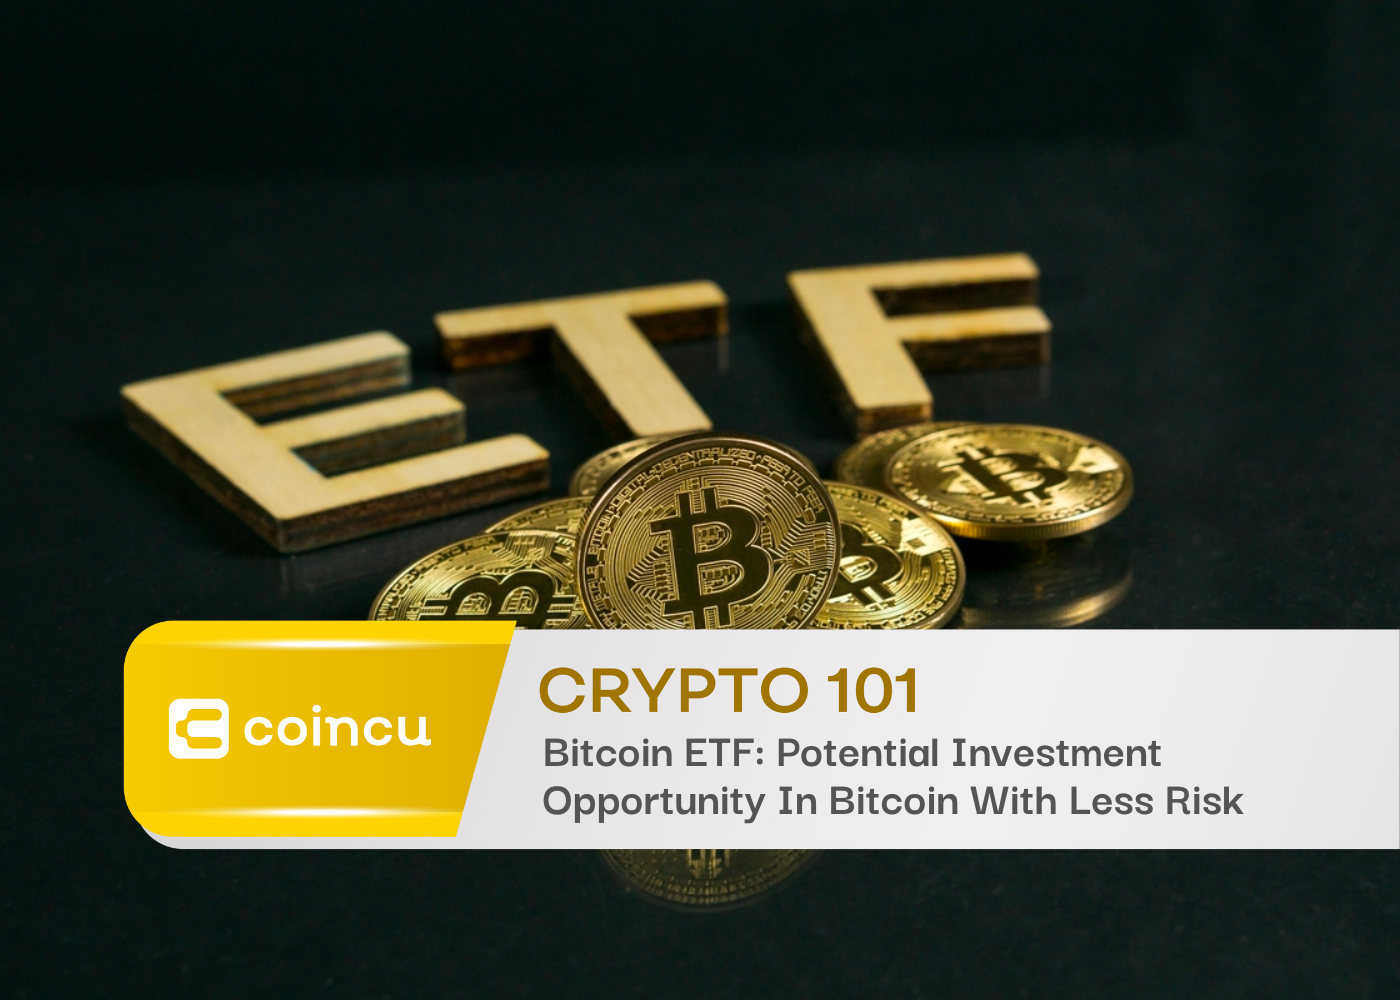 Bitcoin ETF: Potential Investment Opportunity In Bitcoin With Less Risk